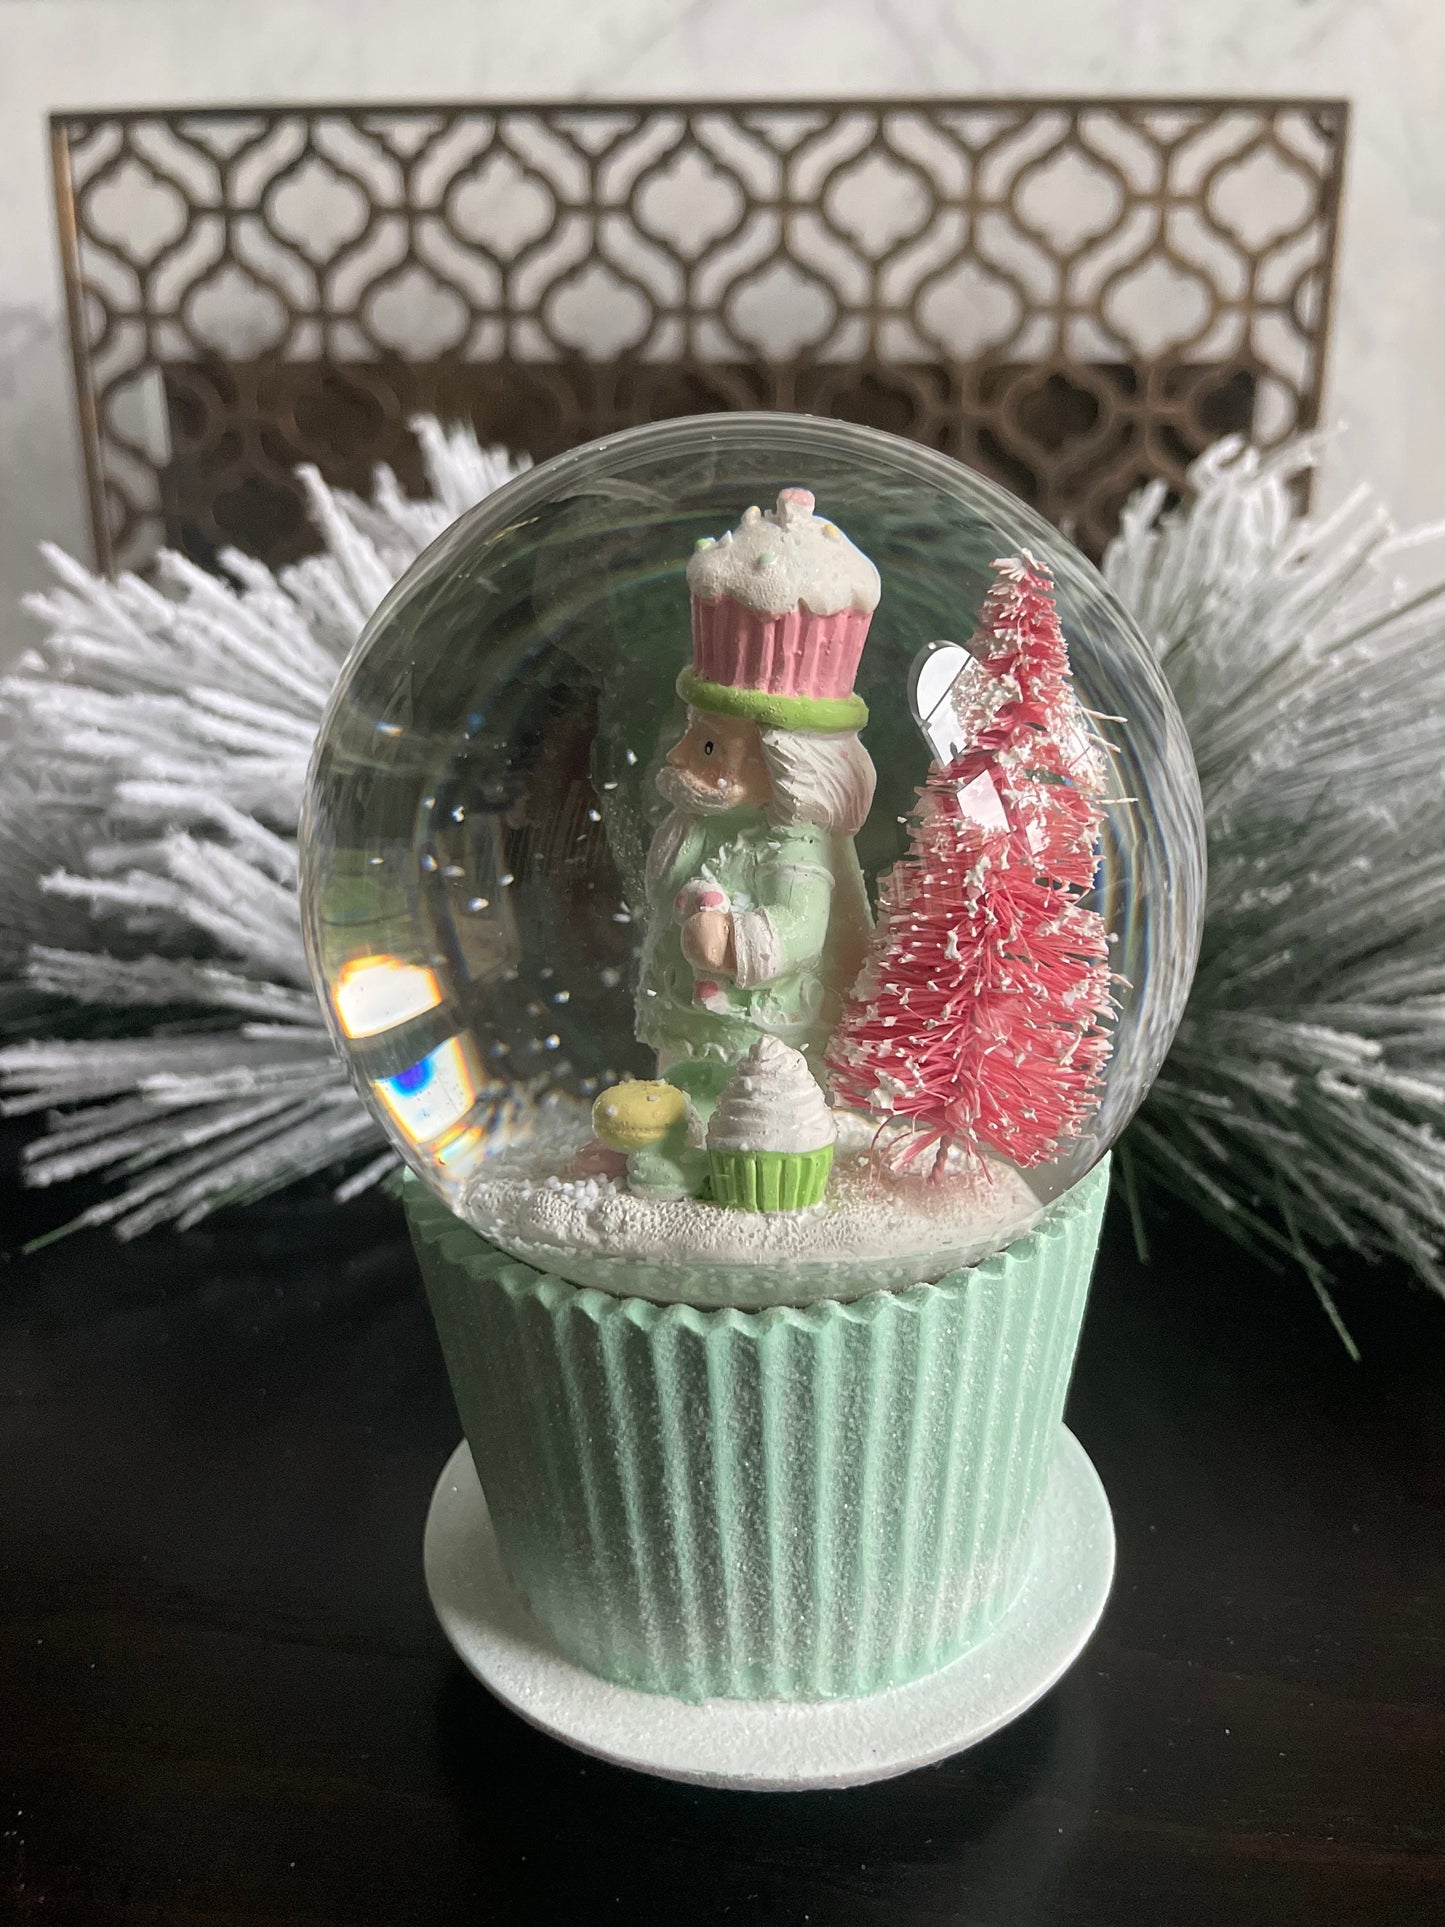 6" Cupcake and nutcracker water music globe. Pastel colors. Candy. Music jingle bells.